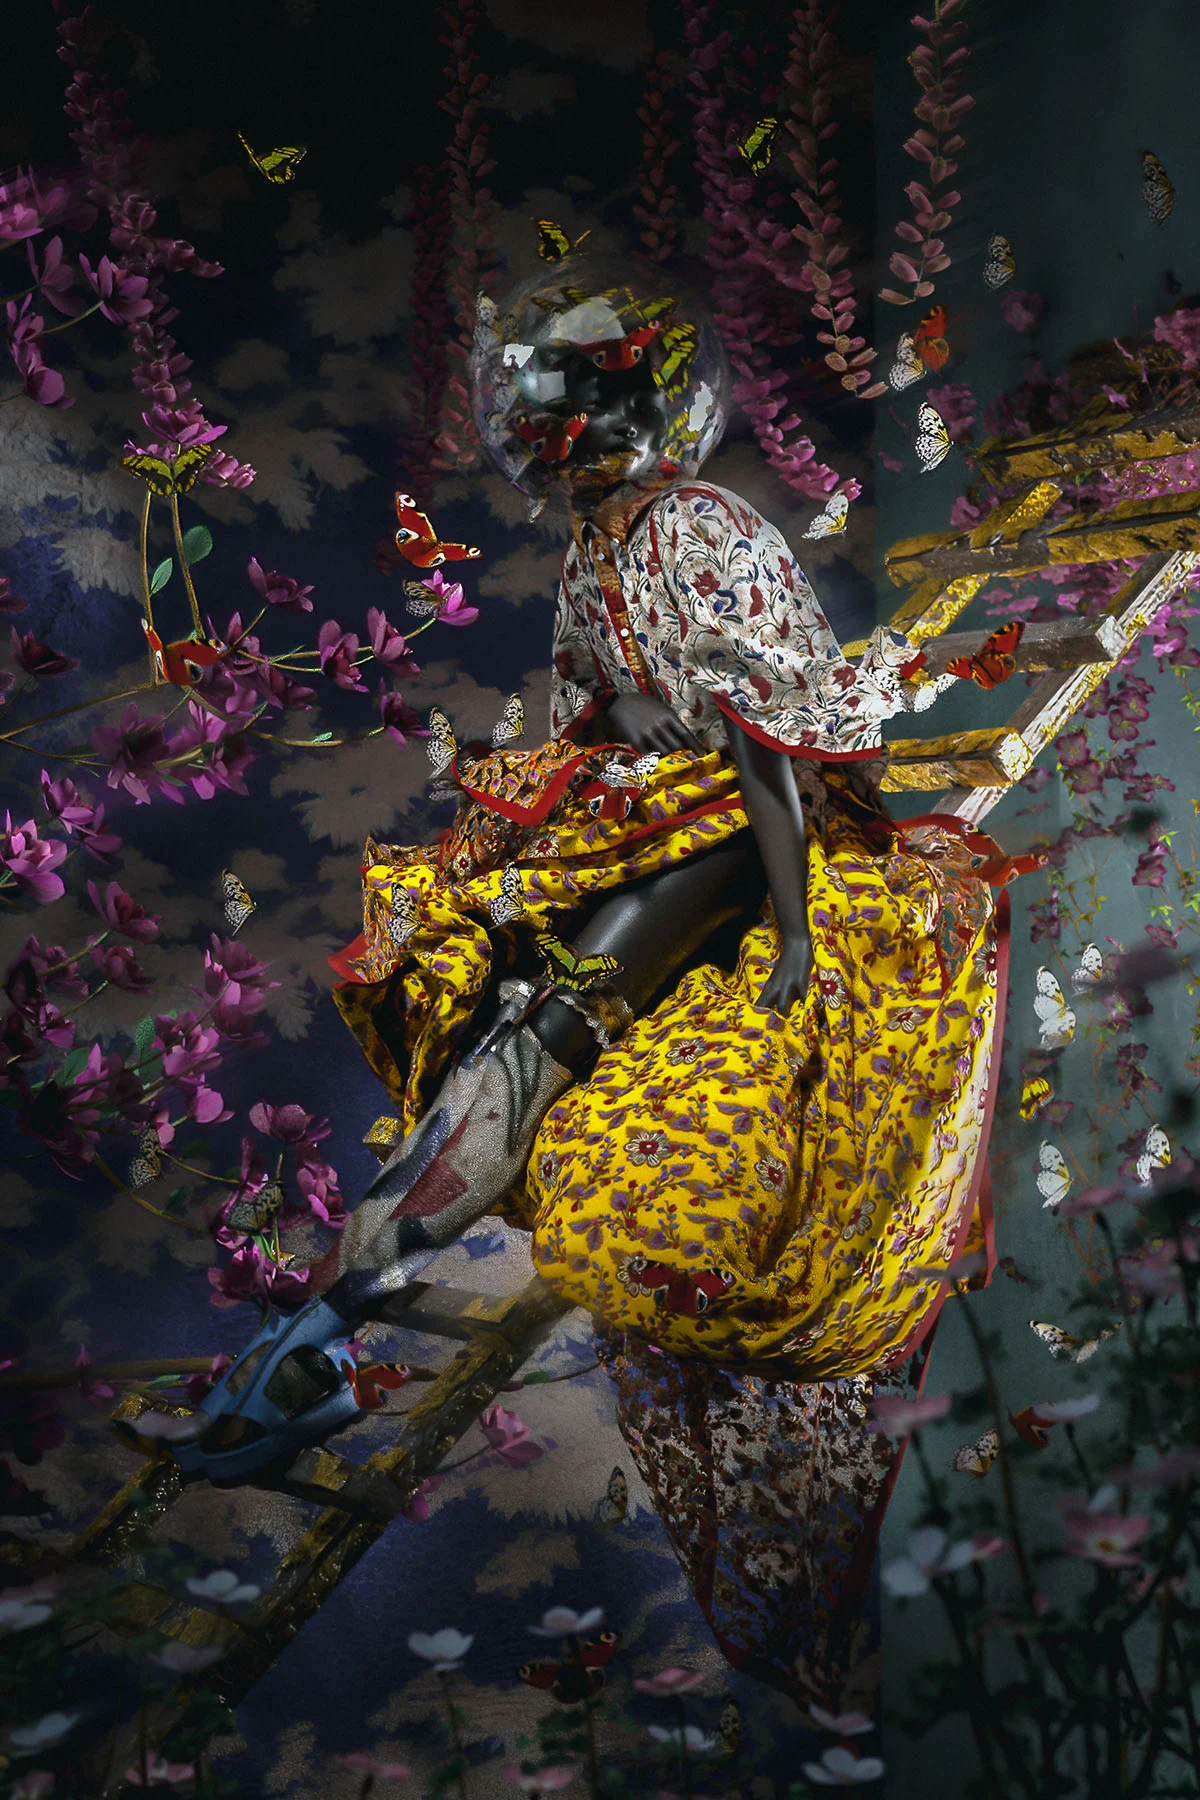 A digitally-rendered image of a figure wearing a colorfully-patterned outfit, climbing down a ladder surrounded by flowers.